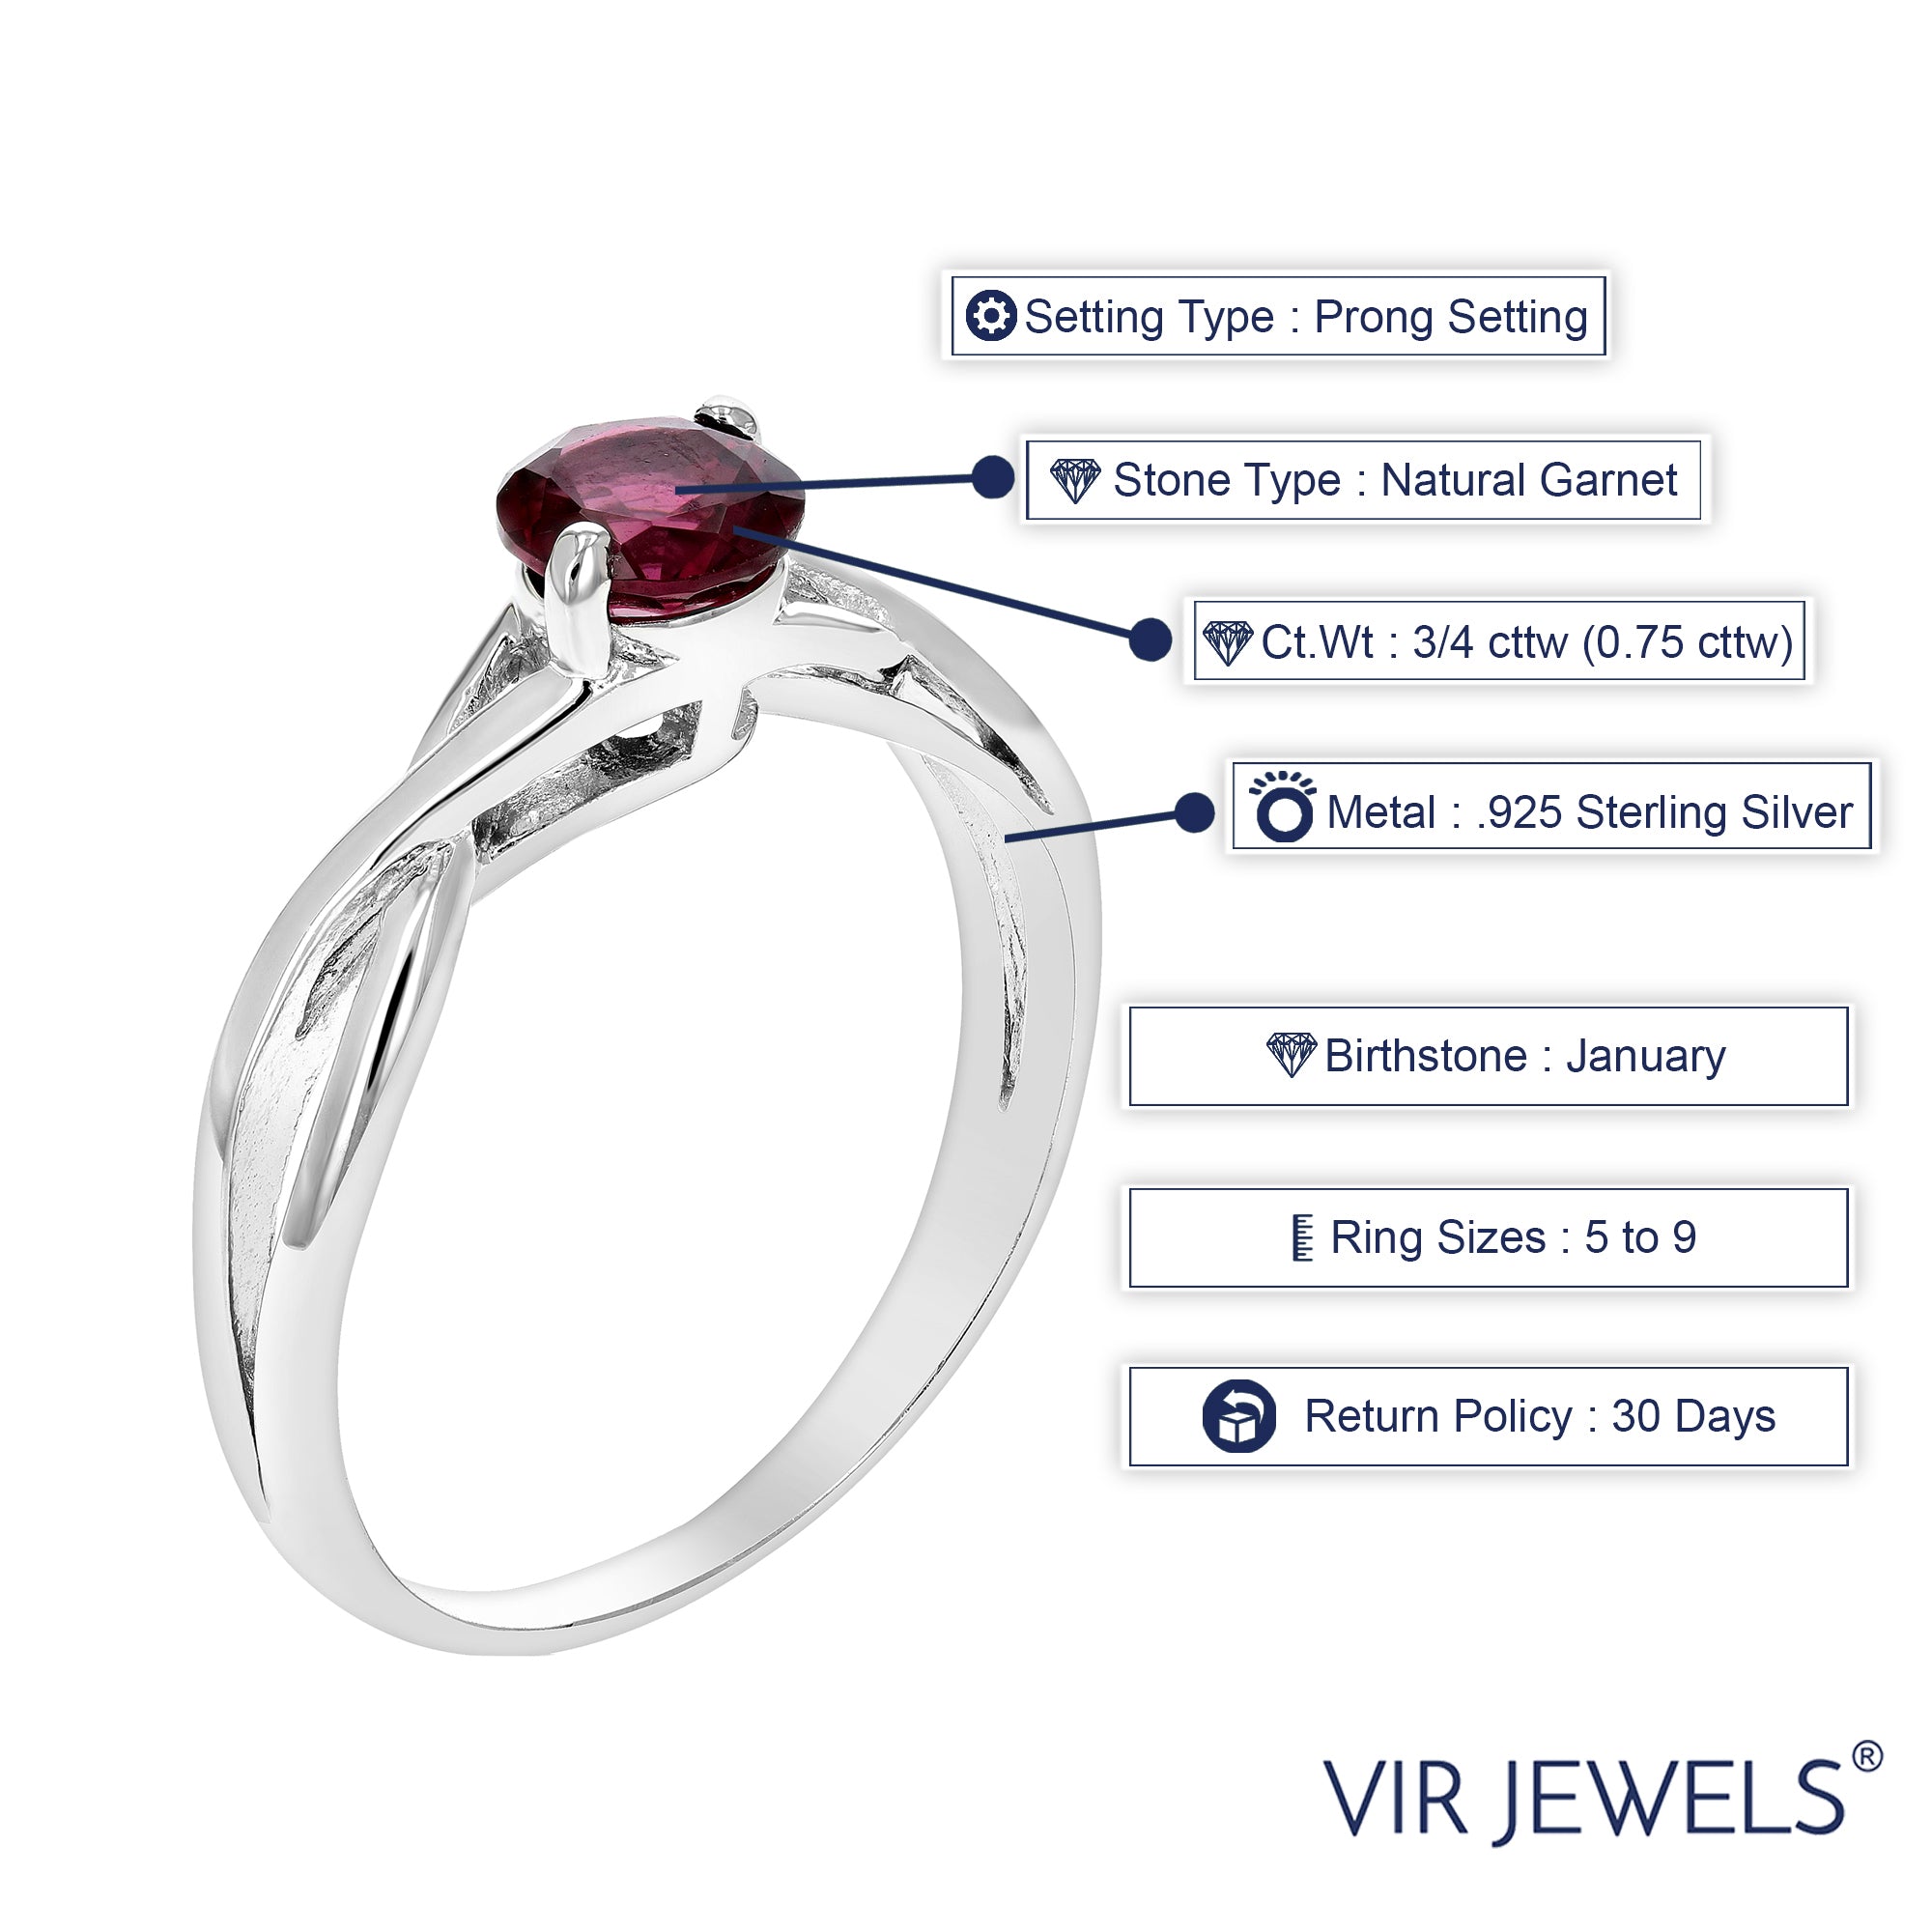 3/4 cttw Garnet Ring .925 Sterling Silver with Rhodium Plating Round Shape 6 MM